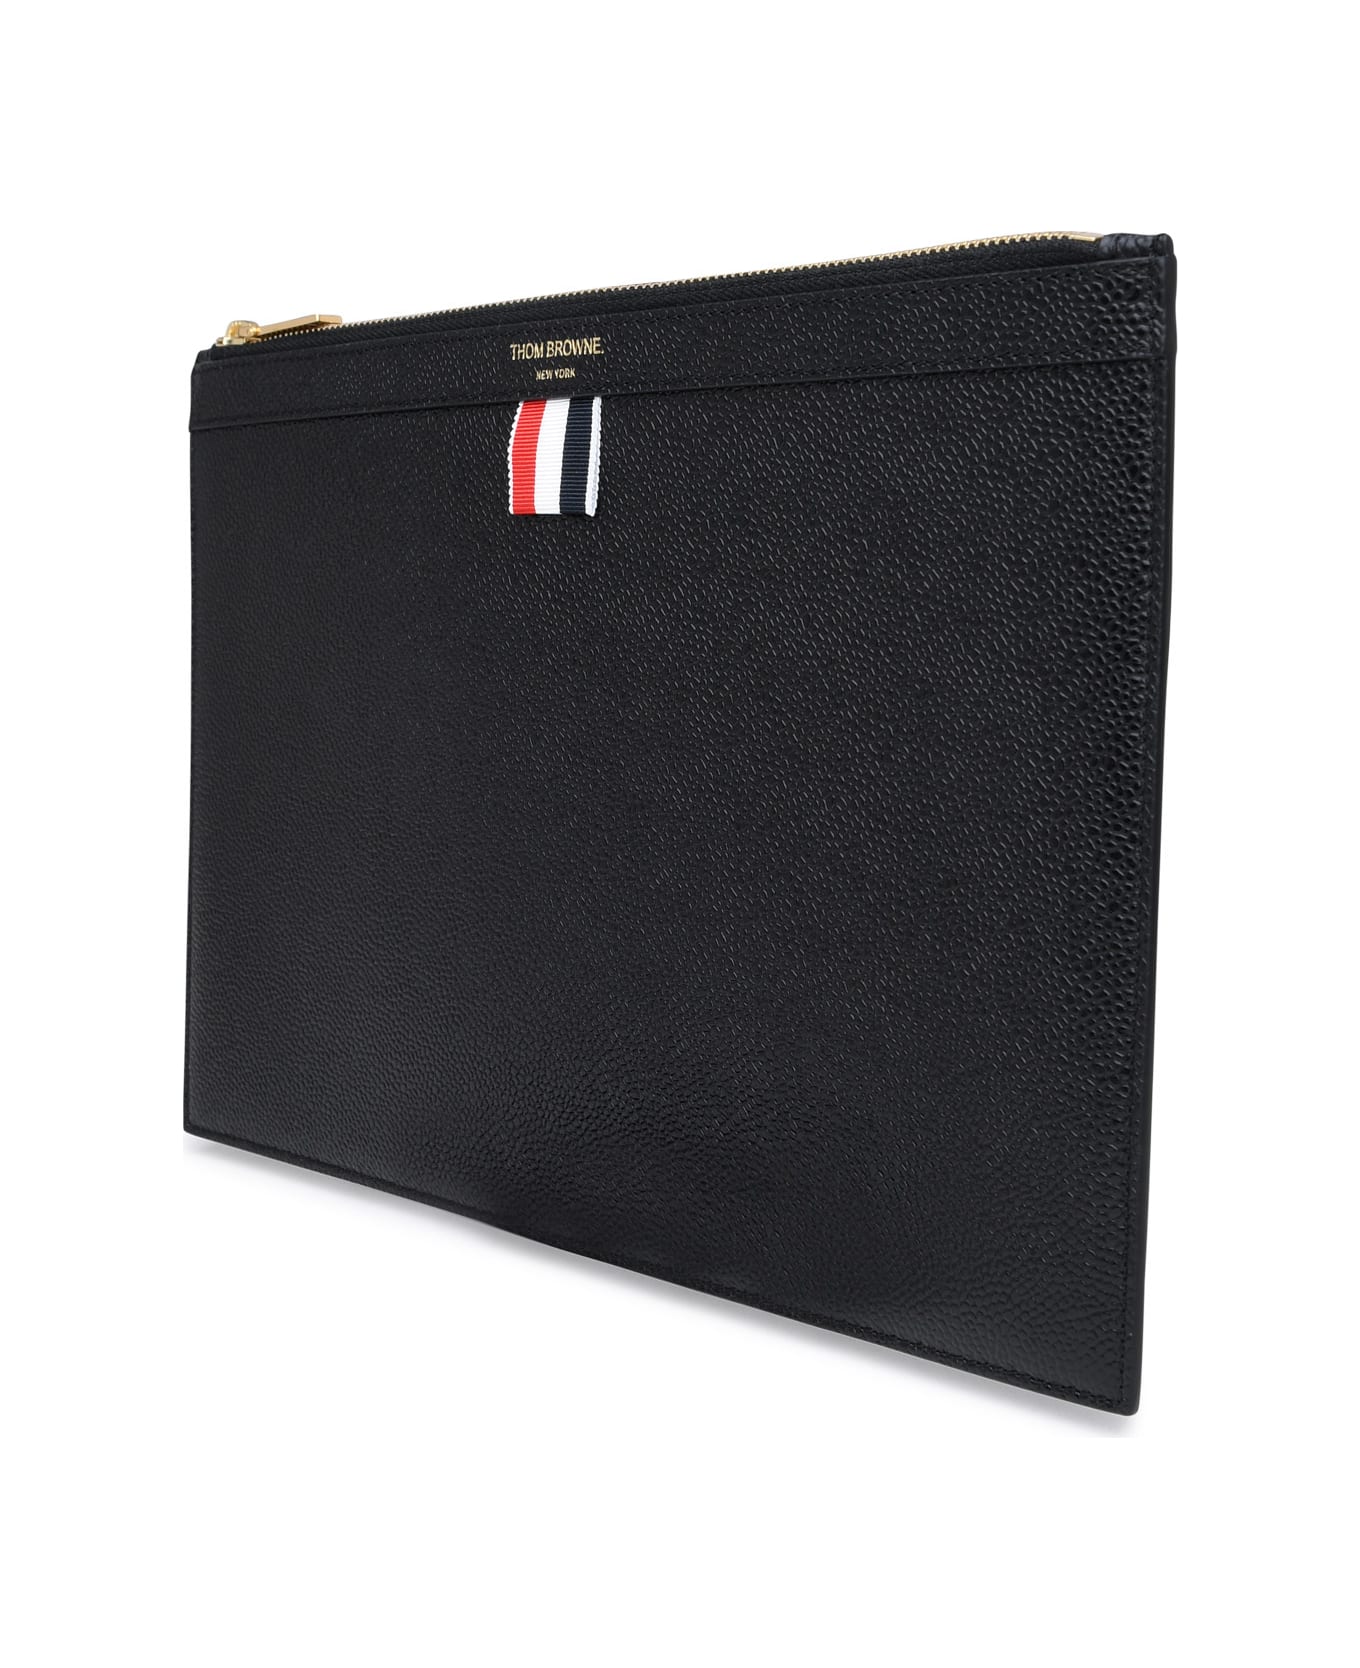 Thom Browne Black Leather Small Document Holder - Black バッグ